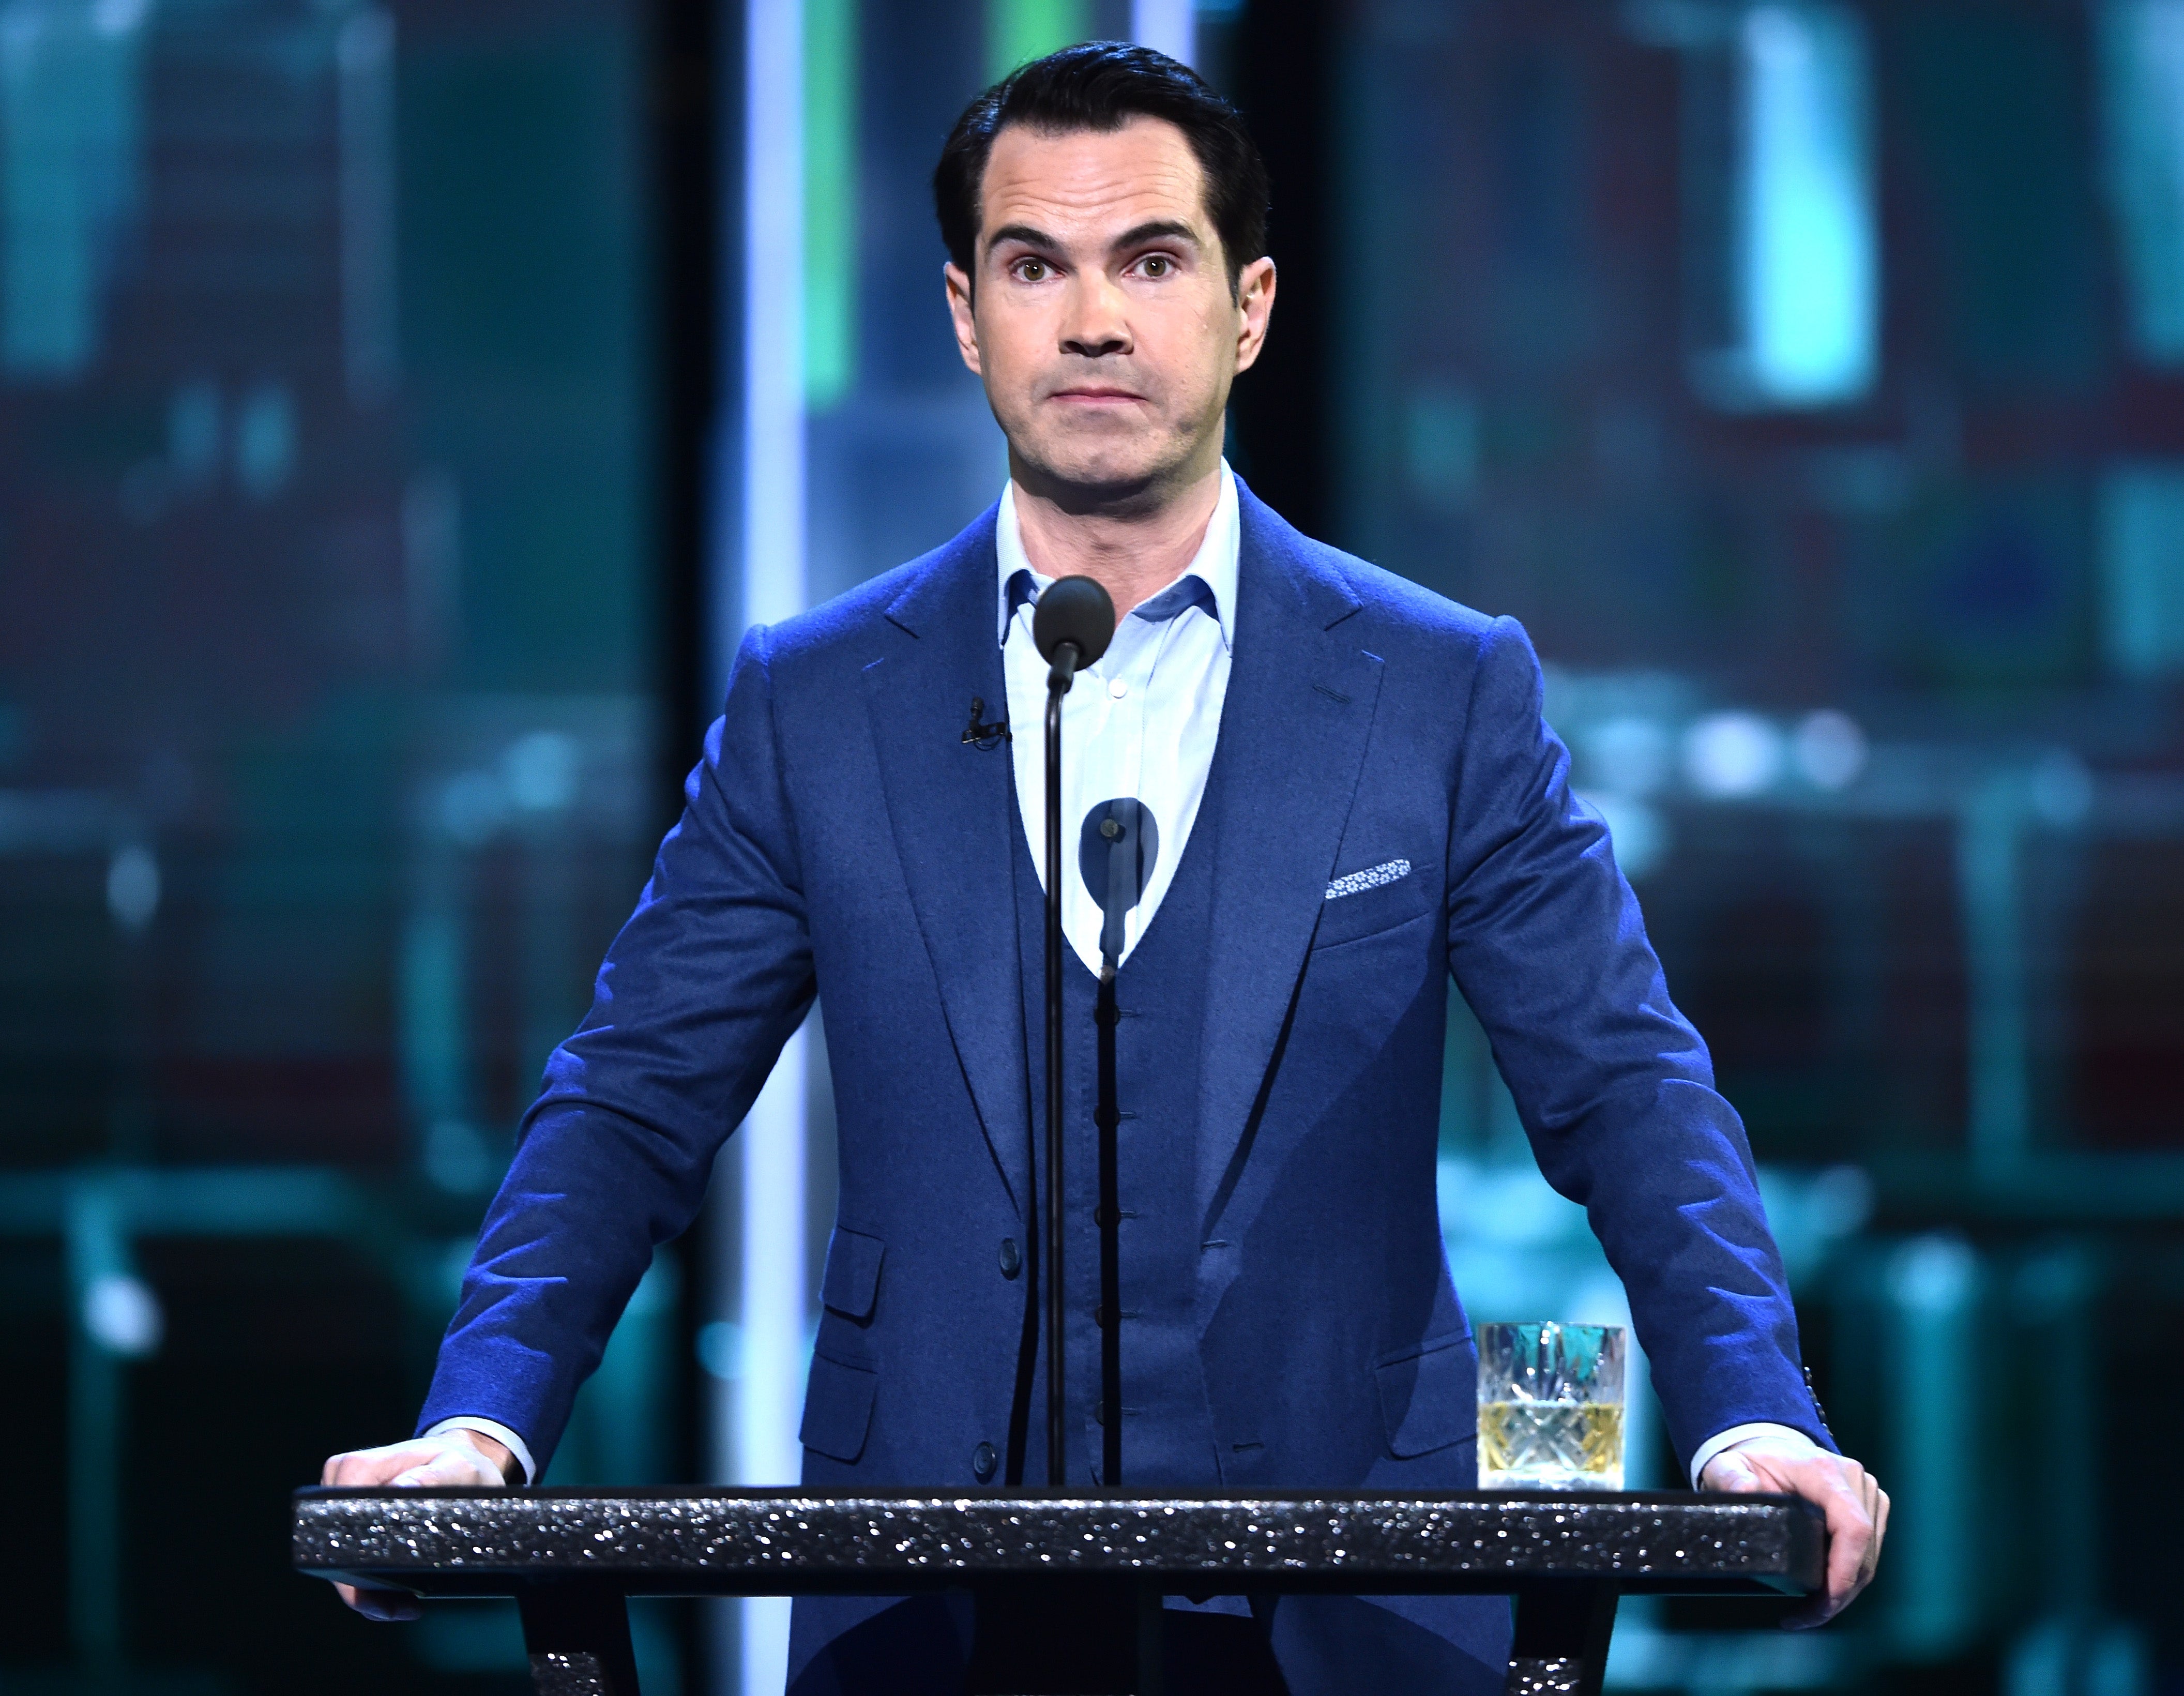 Only a few months ago, we heard comedian Jimmy Carr referring to the “positive” of the Holocaust as being the brutal slaughter of 500,000 Roma and Sinti people